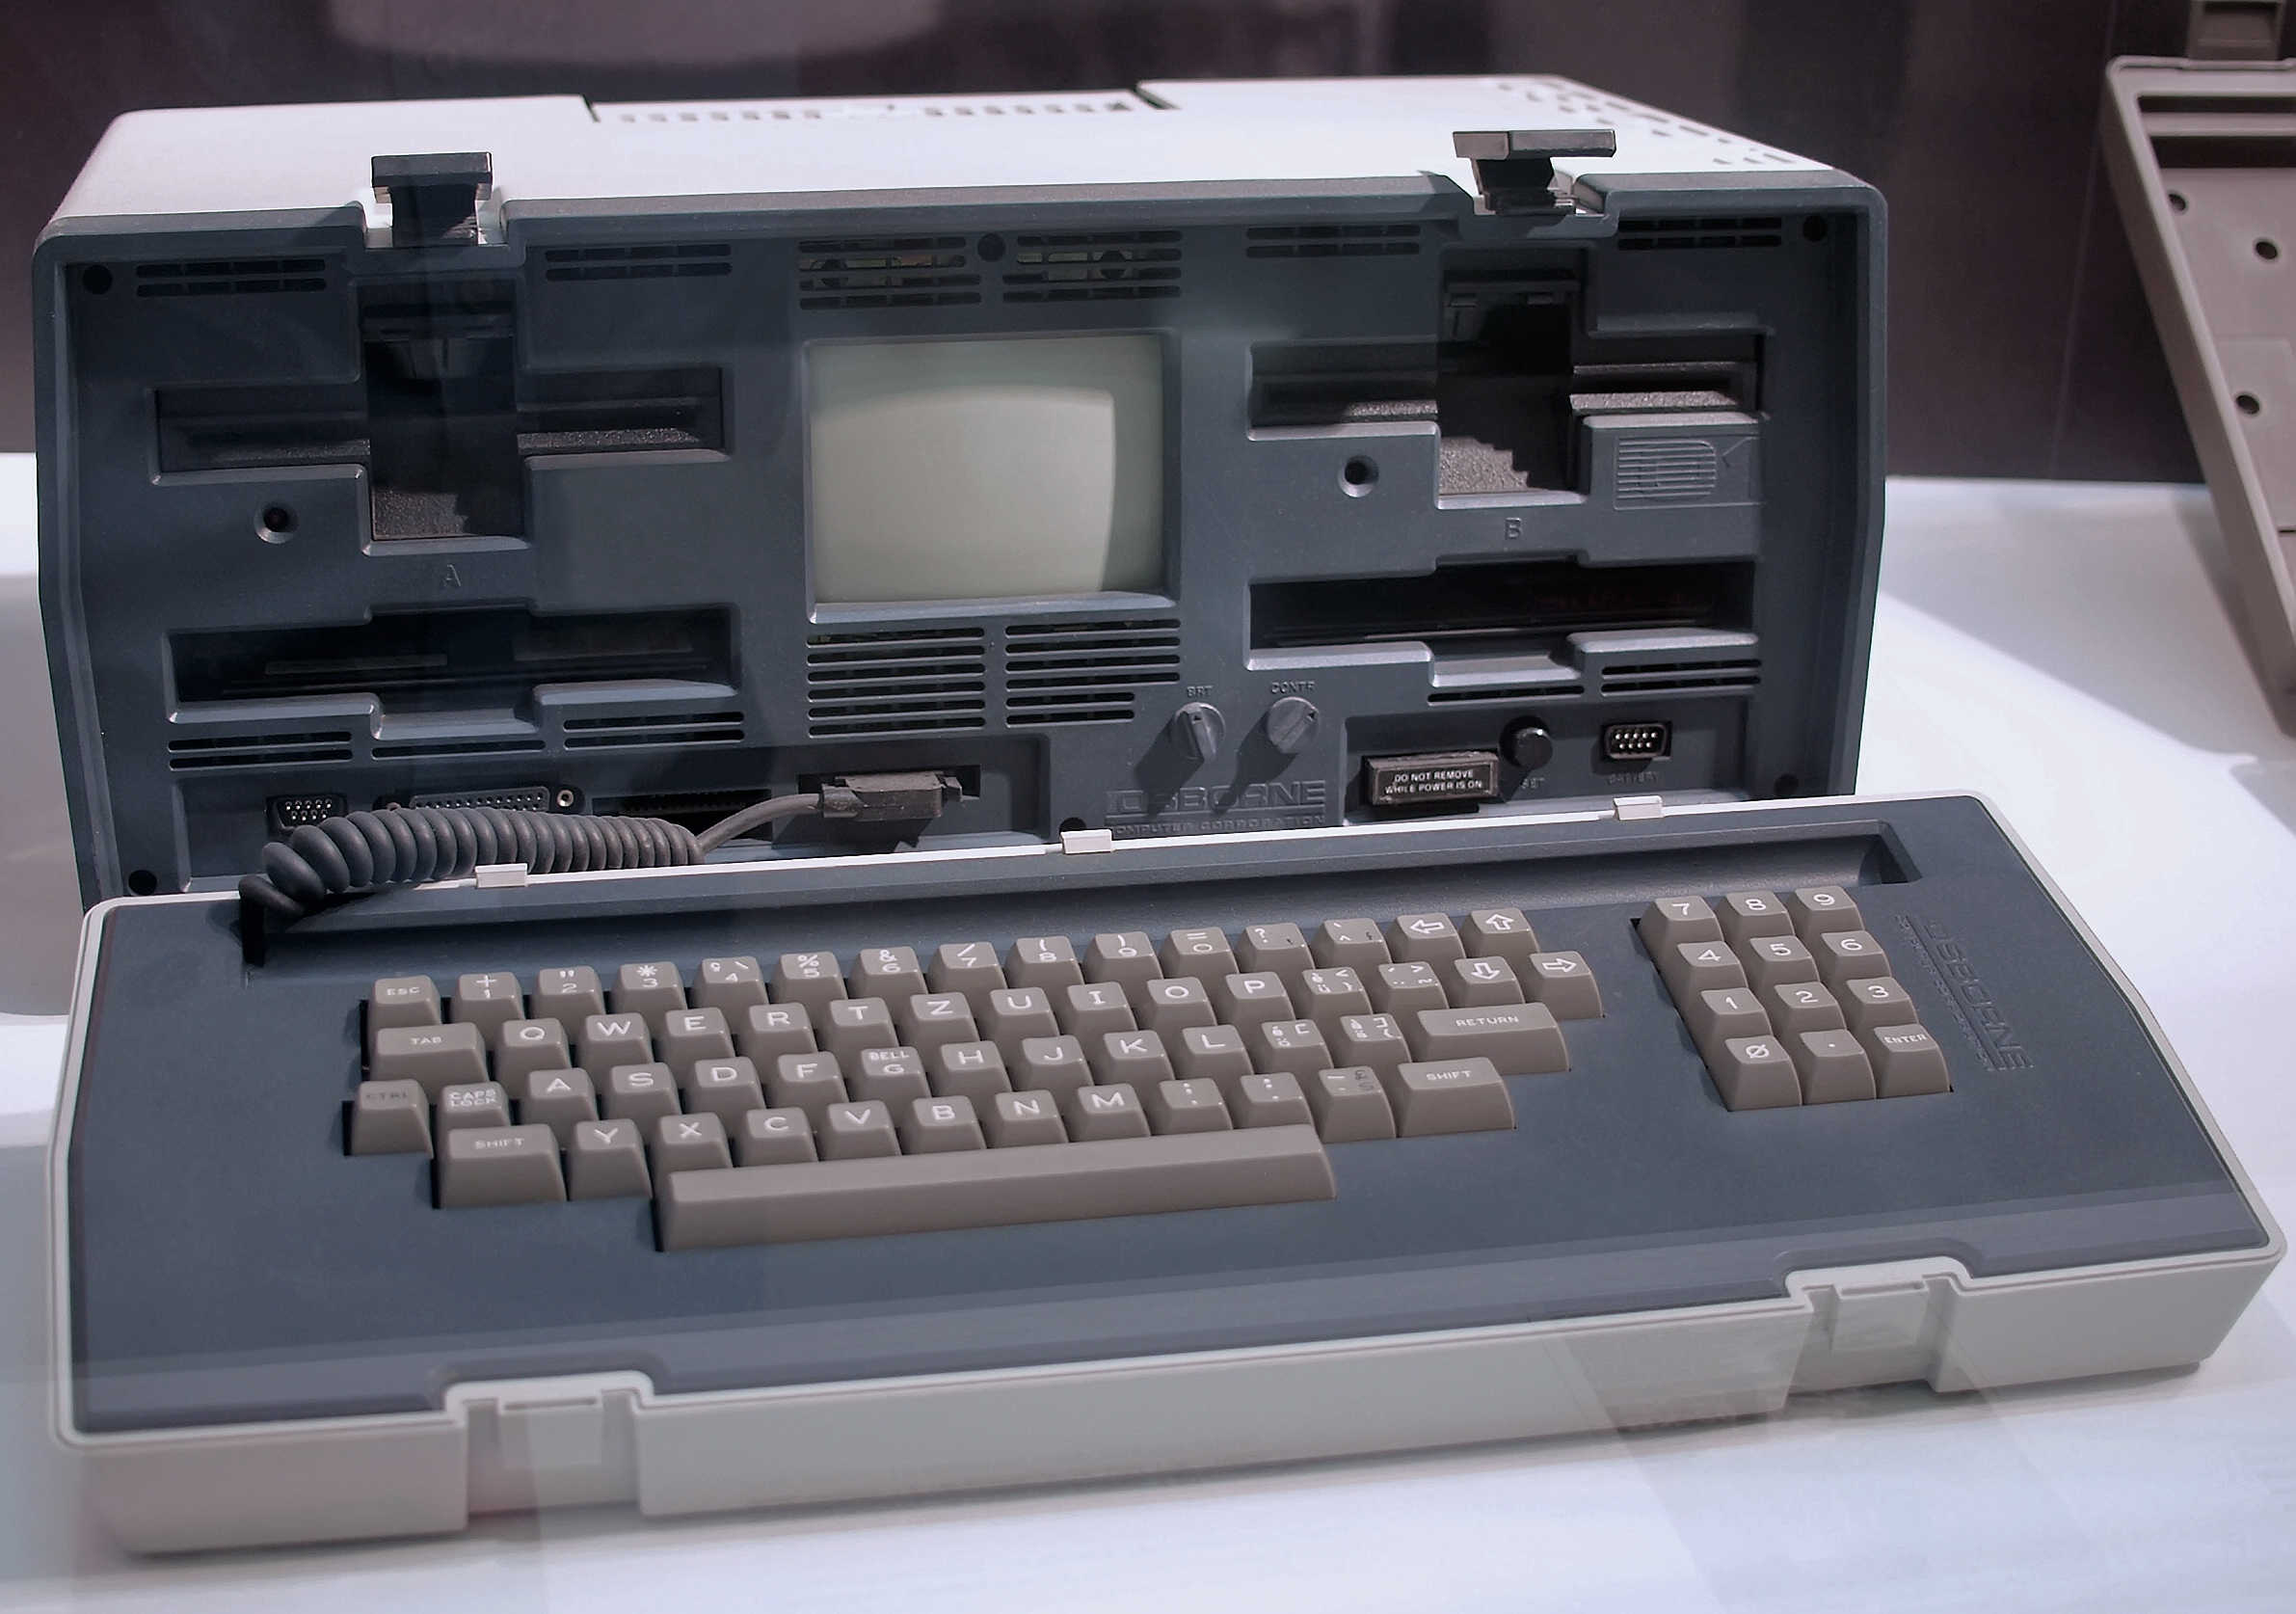 The Osborne 1 portable computer proved ahead of its time.